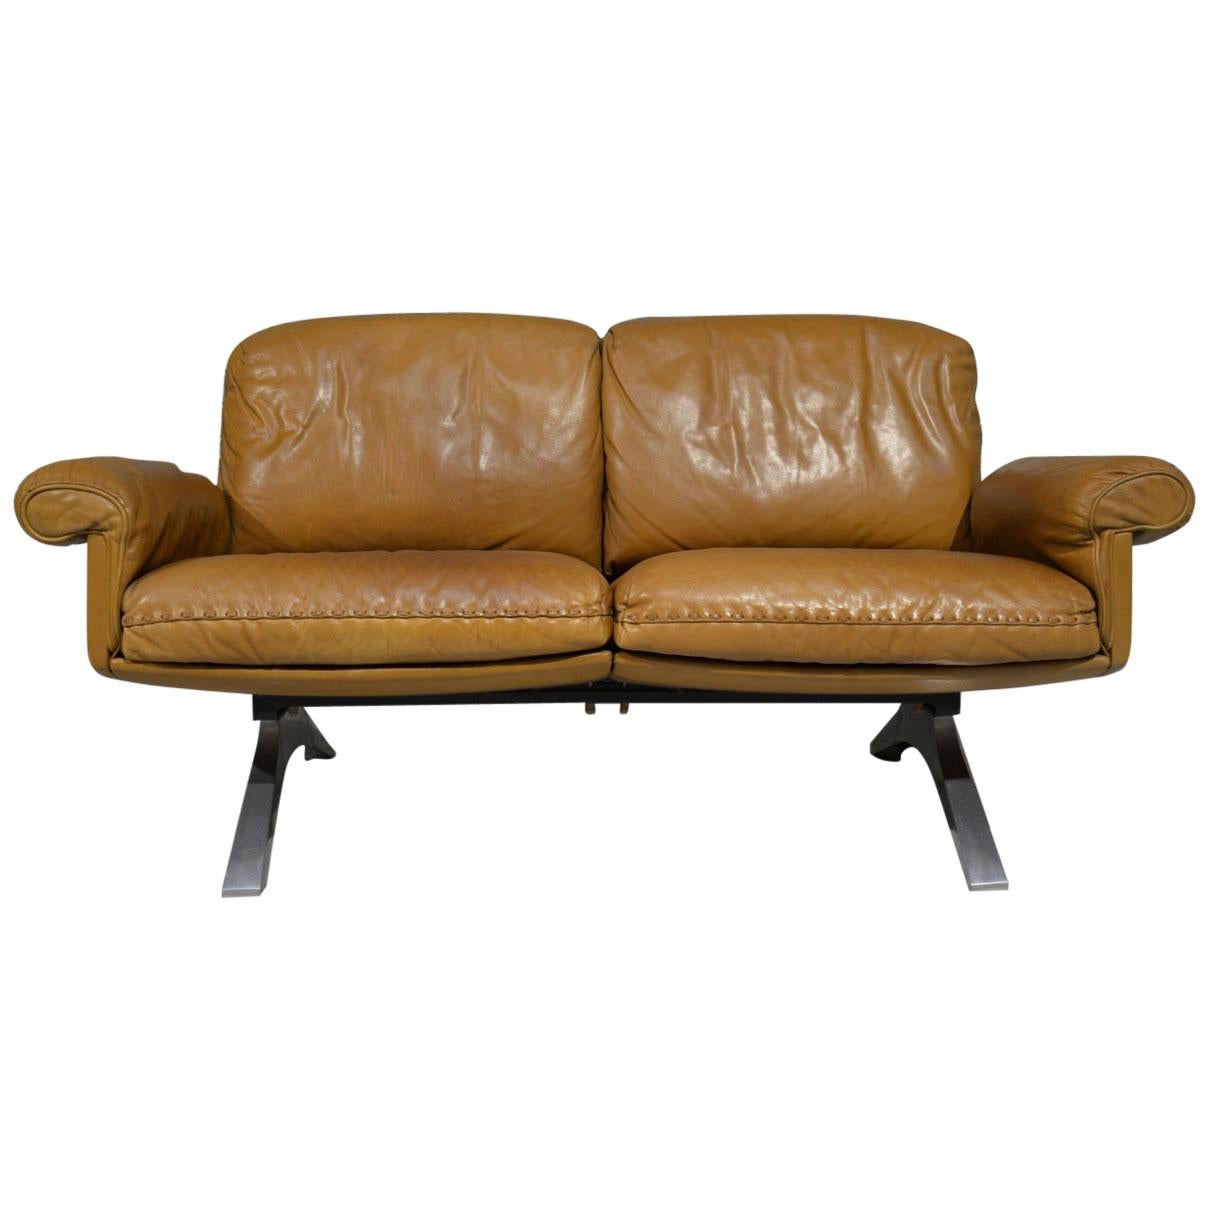 Vintage De Sede DS 31 Leather Two-Seat Sofa or Loveseat, Switzerland, 1970s For Sale